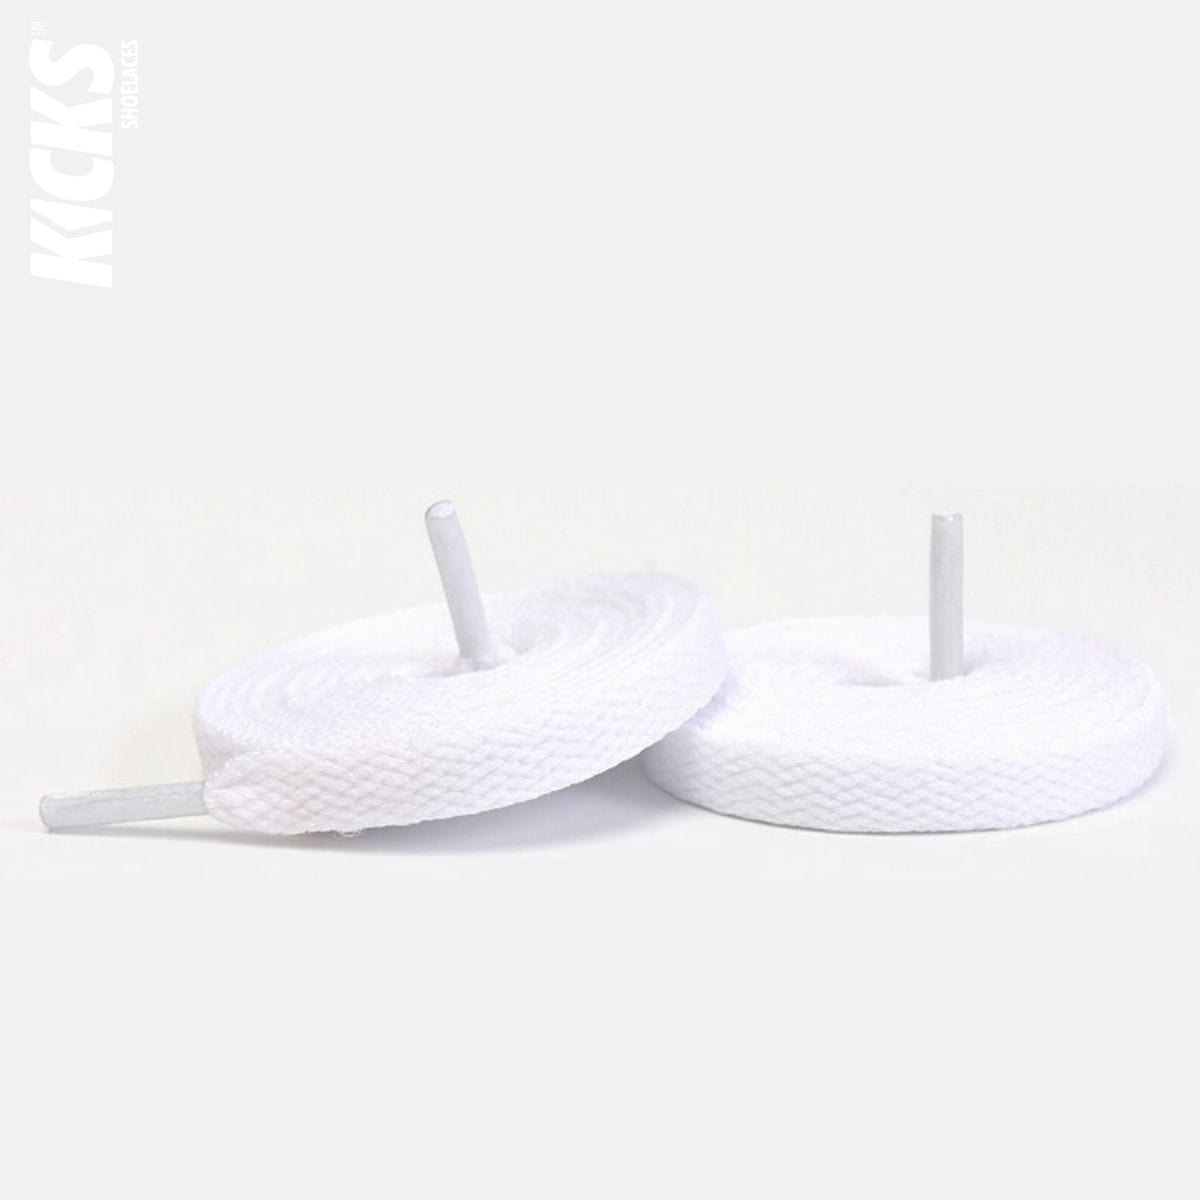 Nike Dunk High Replacement Shoelaces - Kicks Shoelaces